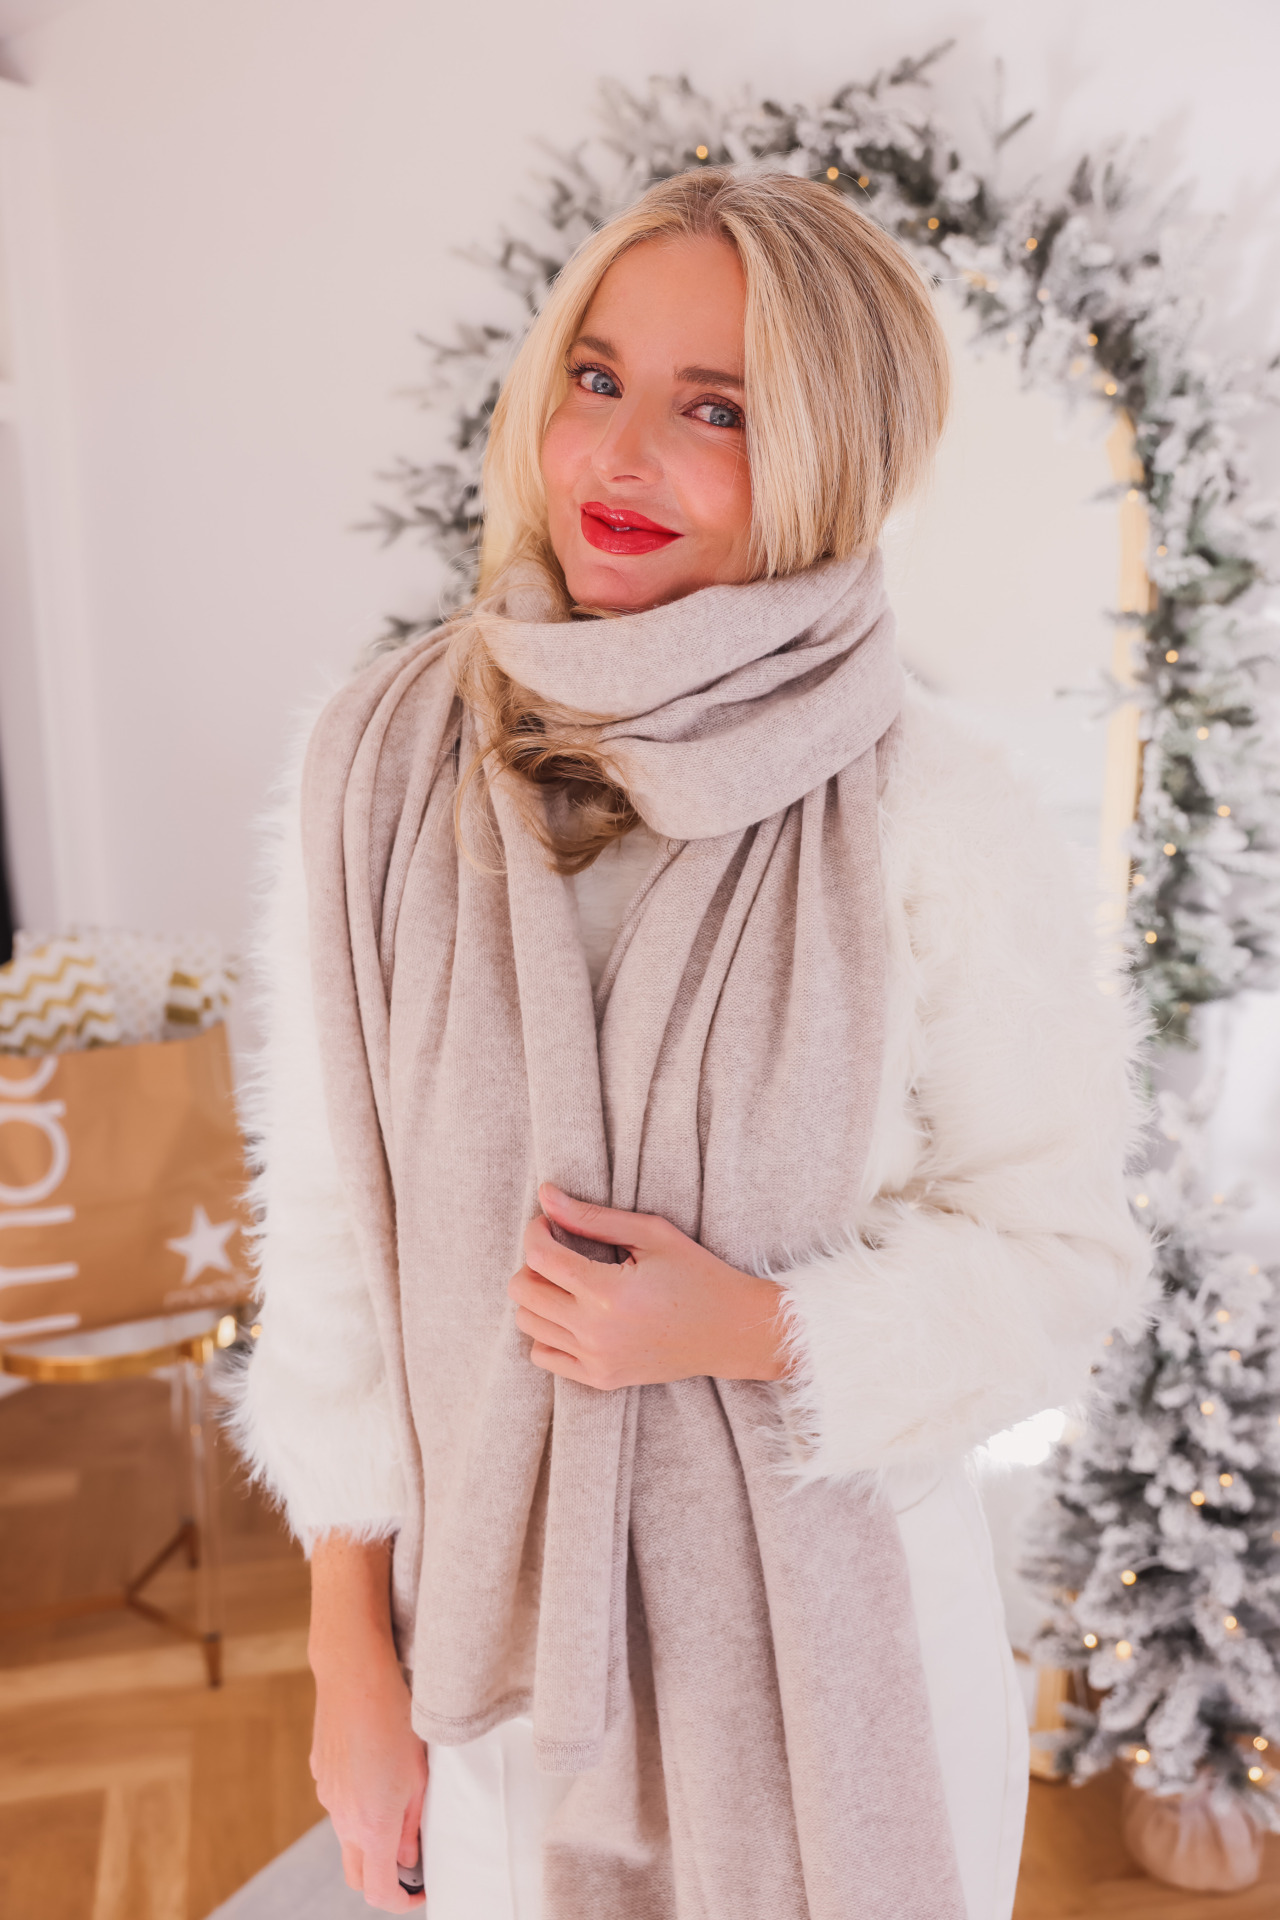 stylish, high-quality, affordable cashmere, Affordable cozy gifts, cozy gifts for her, gifts for the homebody, gifts for women that have everything, Erin Busbee, Busbee Style, Fashion Over 40, Telluride, CO, 100% cashmere scarf from Macy's